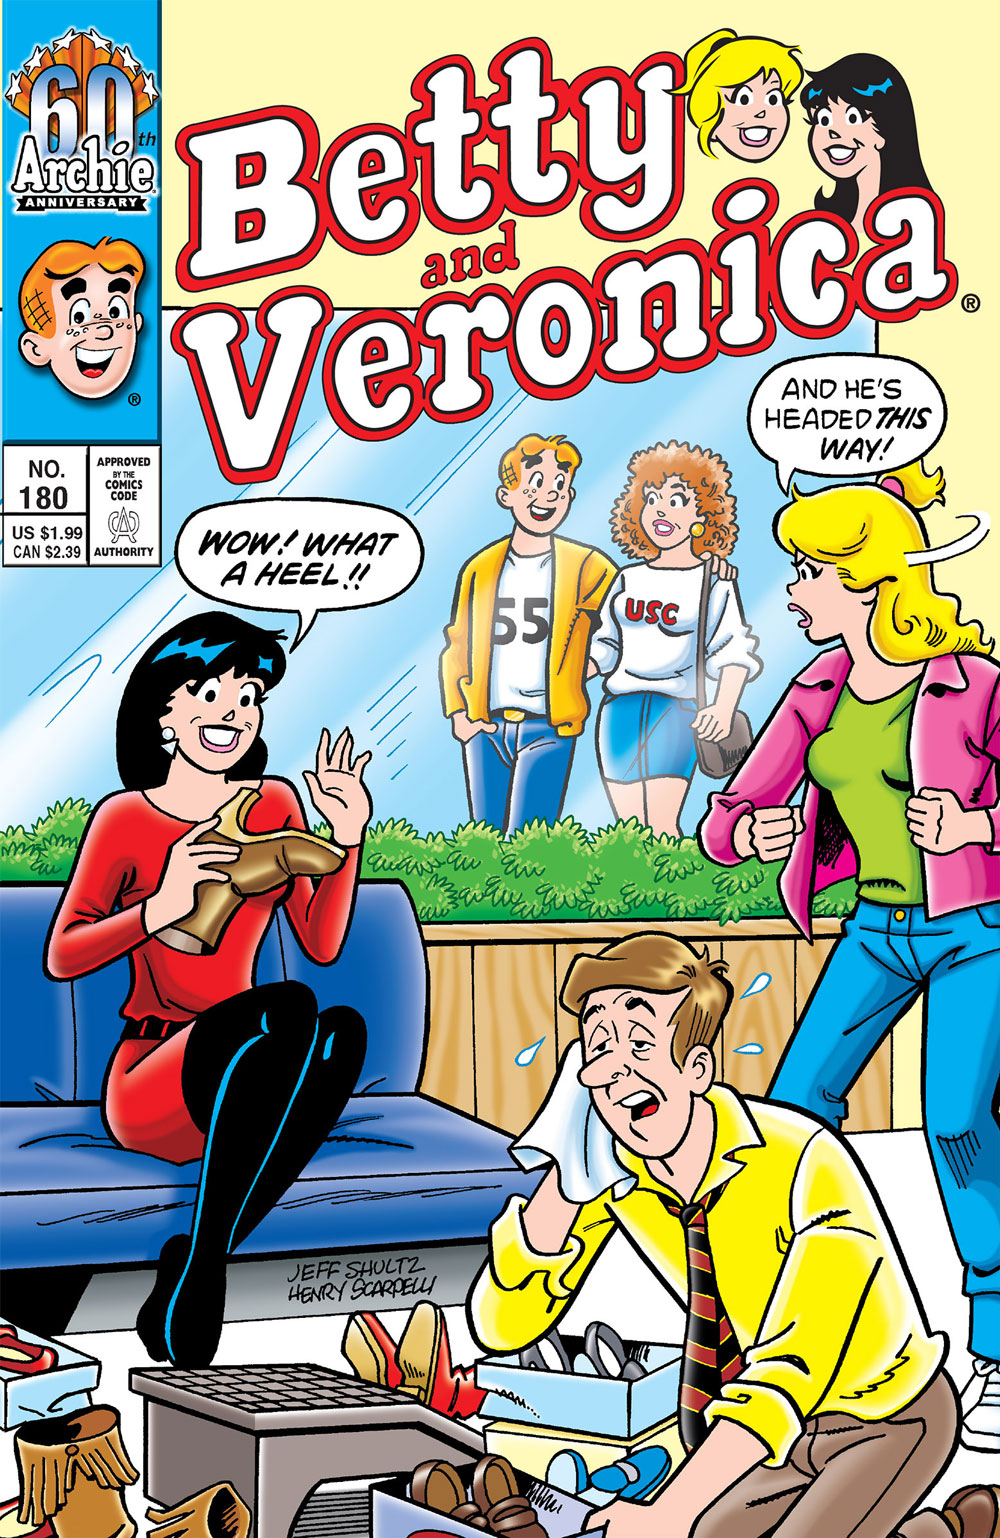 Betty and Veronica are trying on shows in a show store, with an exhausted show salesman kneeling on the floor in the foreground, wiping sweat from his brow. Veronica looks at a high heel show and says, Wow, what a heel! Betty, looking angry, sees Archie with another girl outside. She says Archie is the heel and he's headed this way.